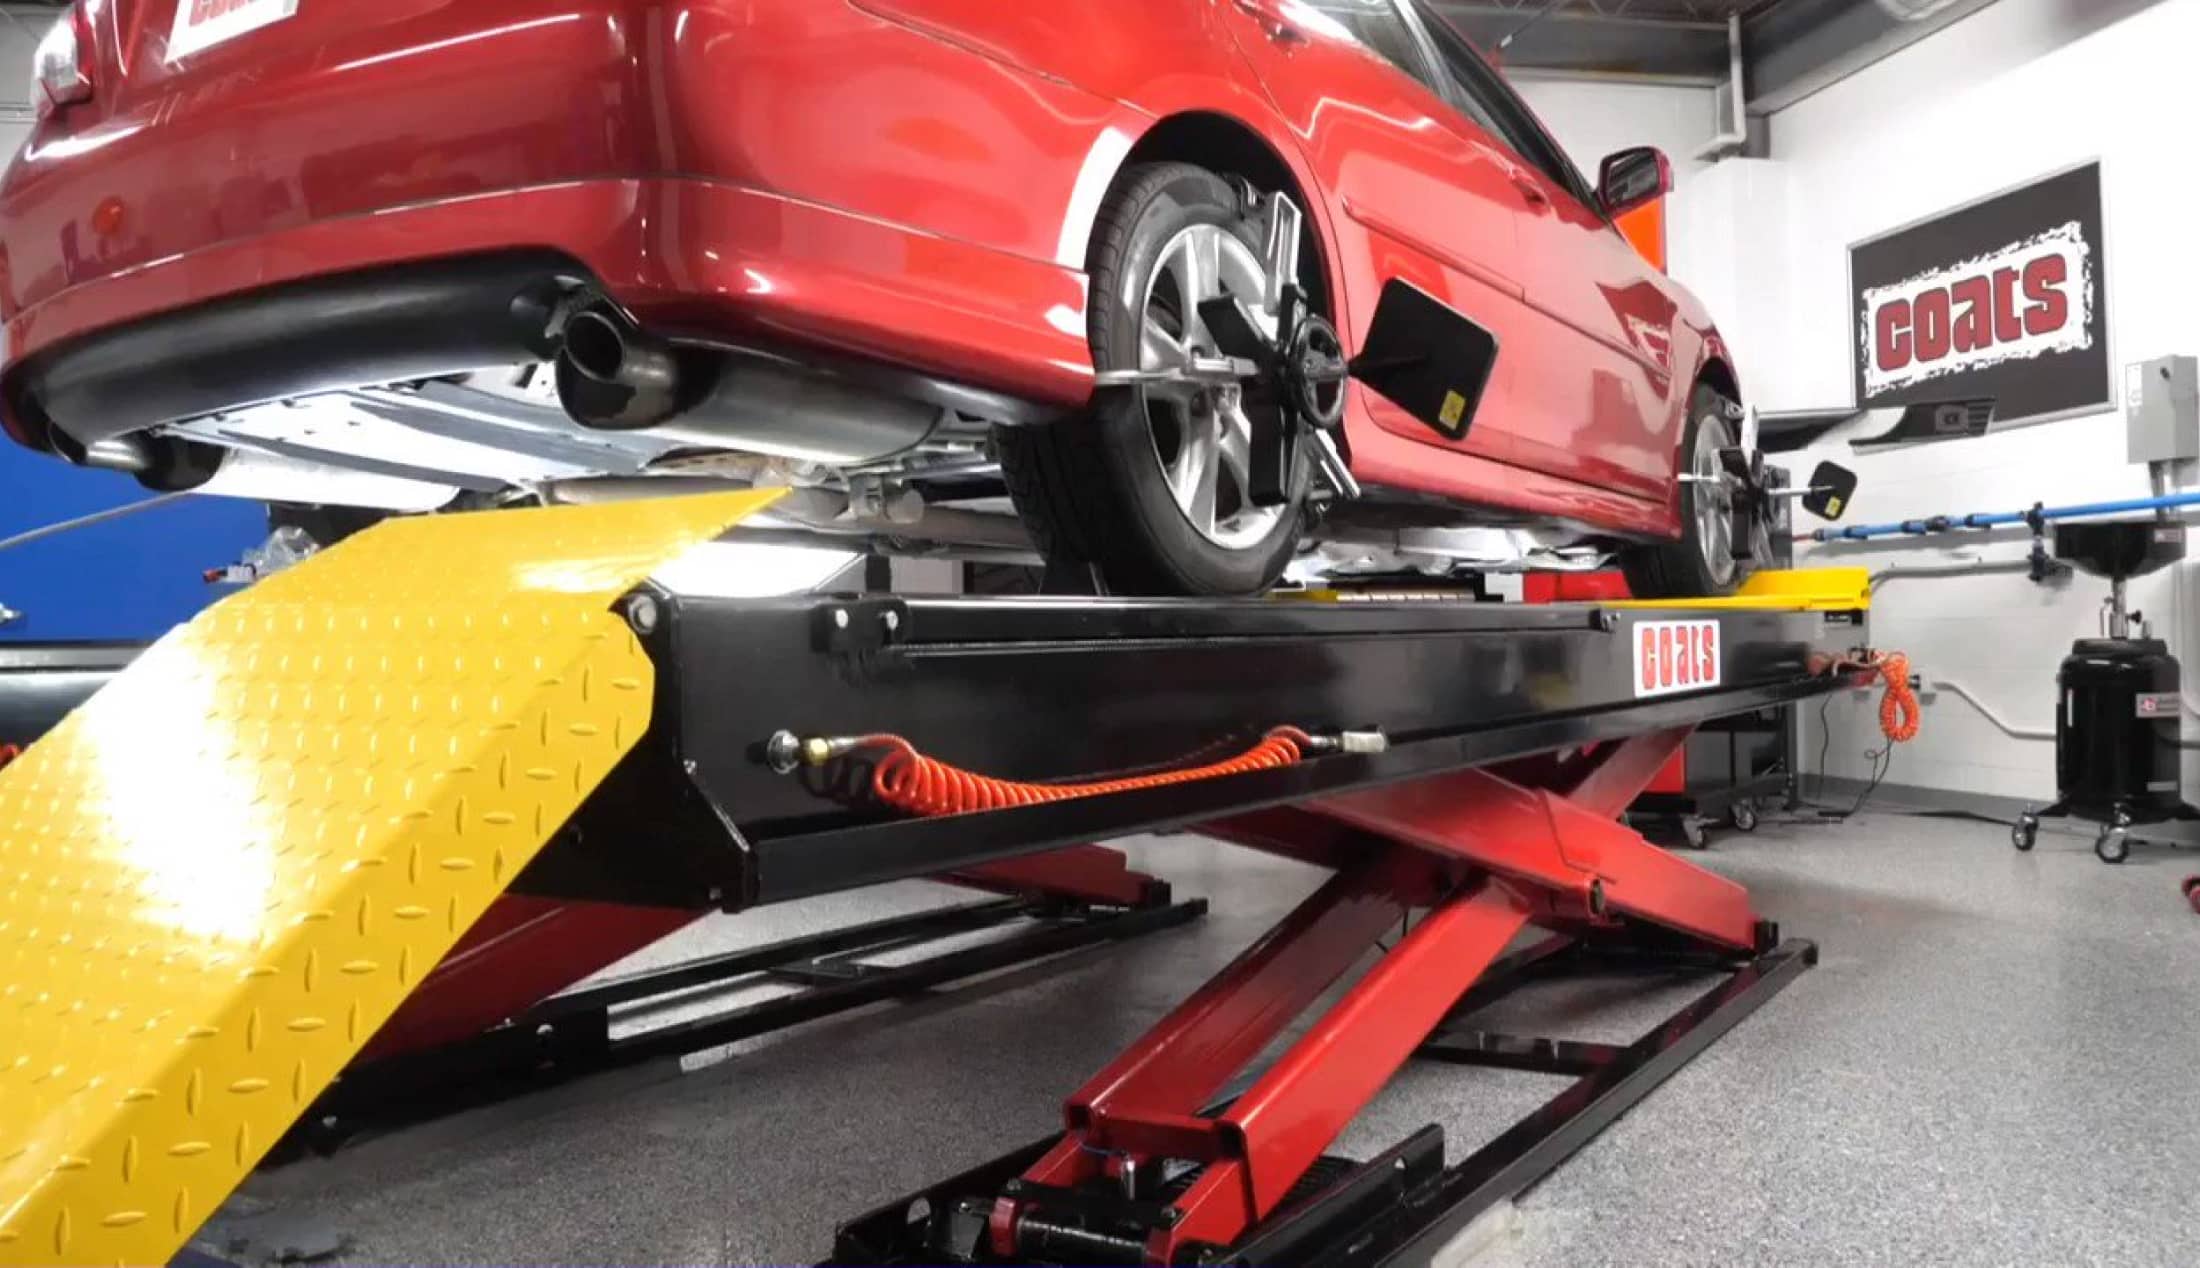 A red sedan is raised on a Coats alignment scissor lift in front of a Coats wheel aligne